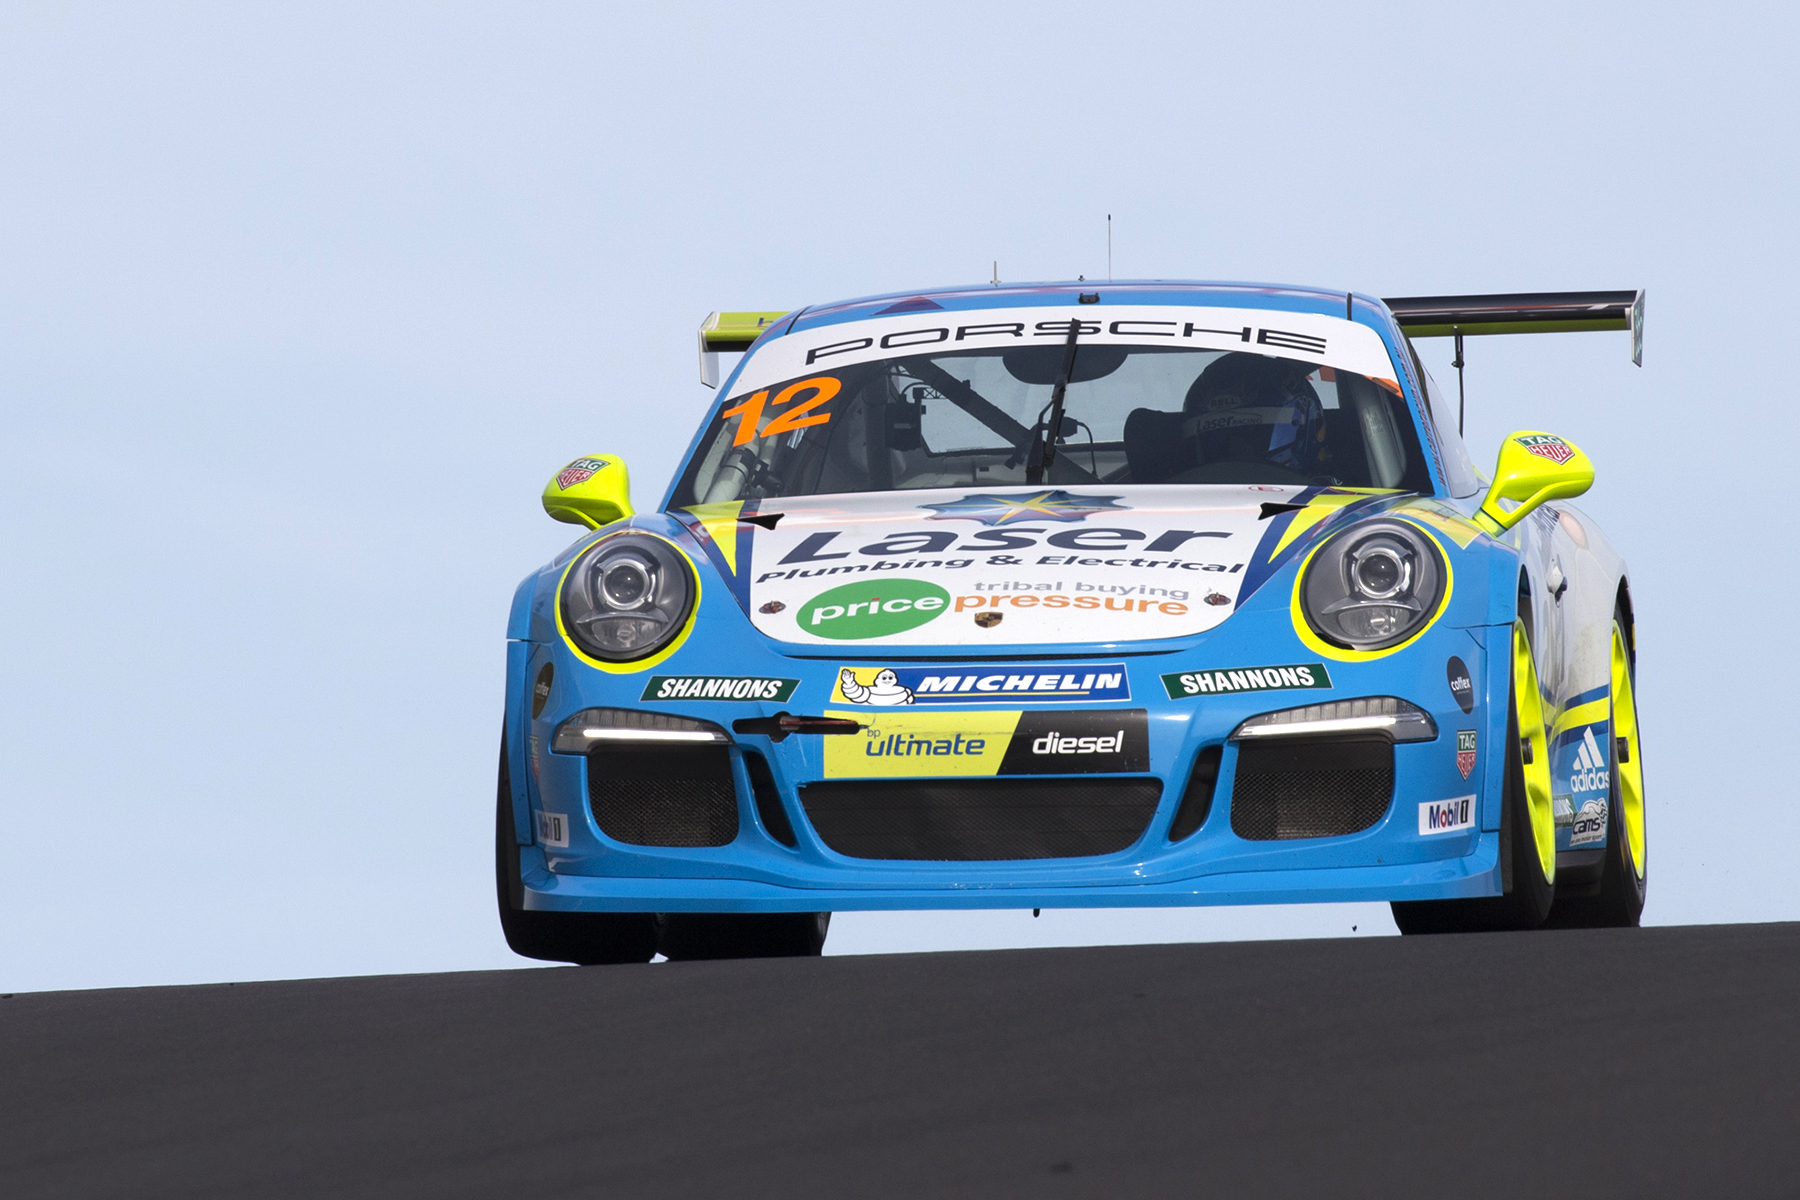 Captured at Round 7 of the Porsche Carrera Cup at the Supercheap Auto Bathurst 1000, Mount Panorama Circuit, Bathurst, New South Wales, Australia.